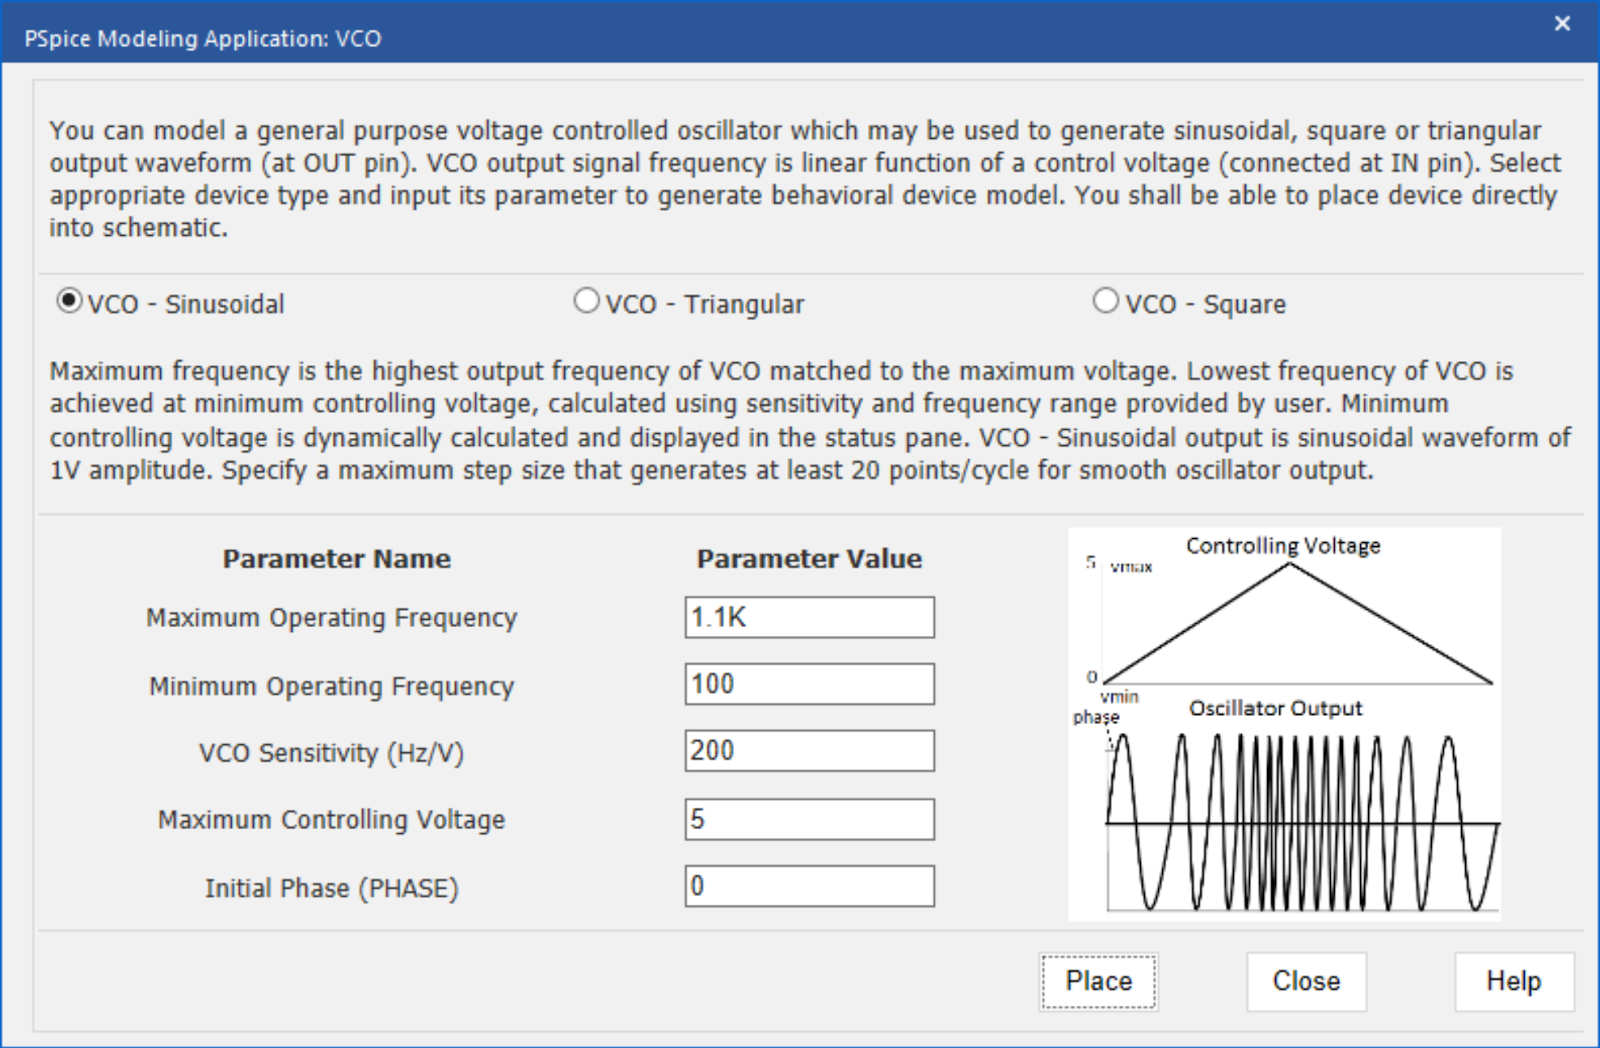 Create a voltage-controlled oscillator SPICE model using the PSpice Modeling Application